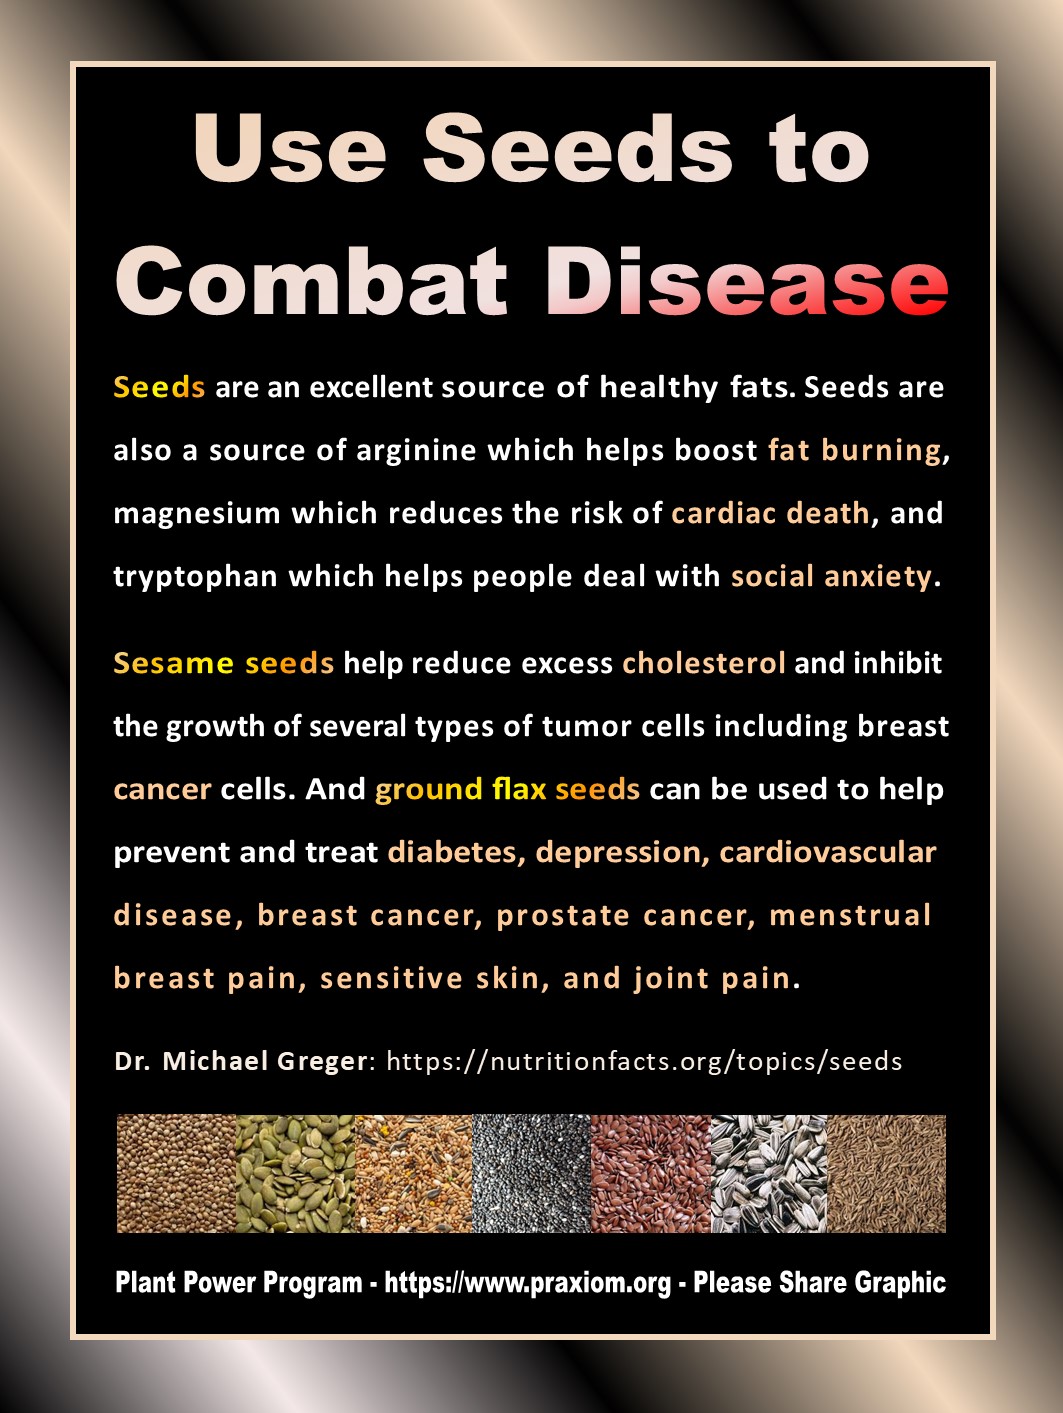 Use Seeds to Combat Diabetes - Dr. Michael Greger